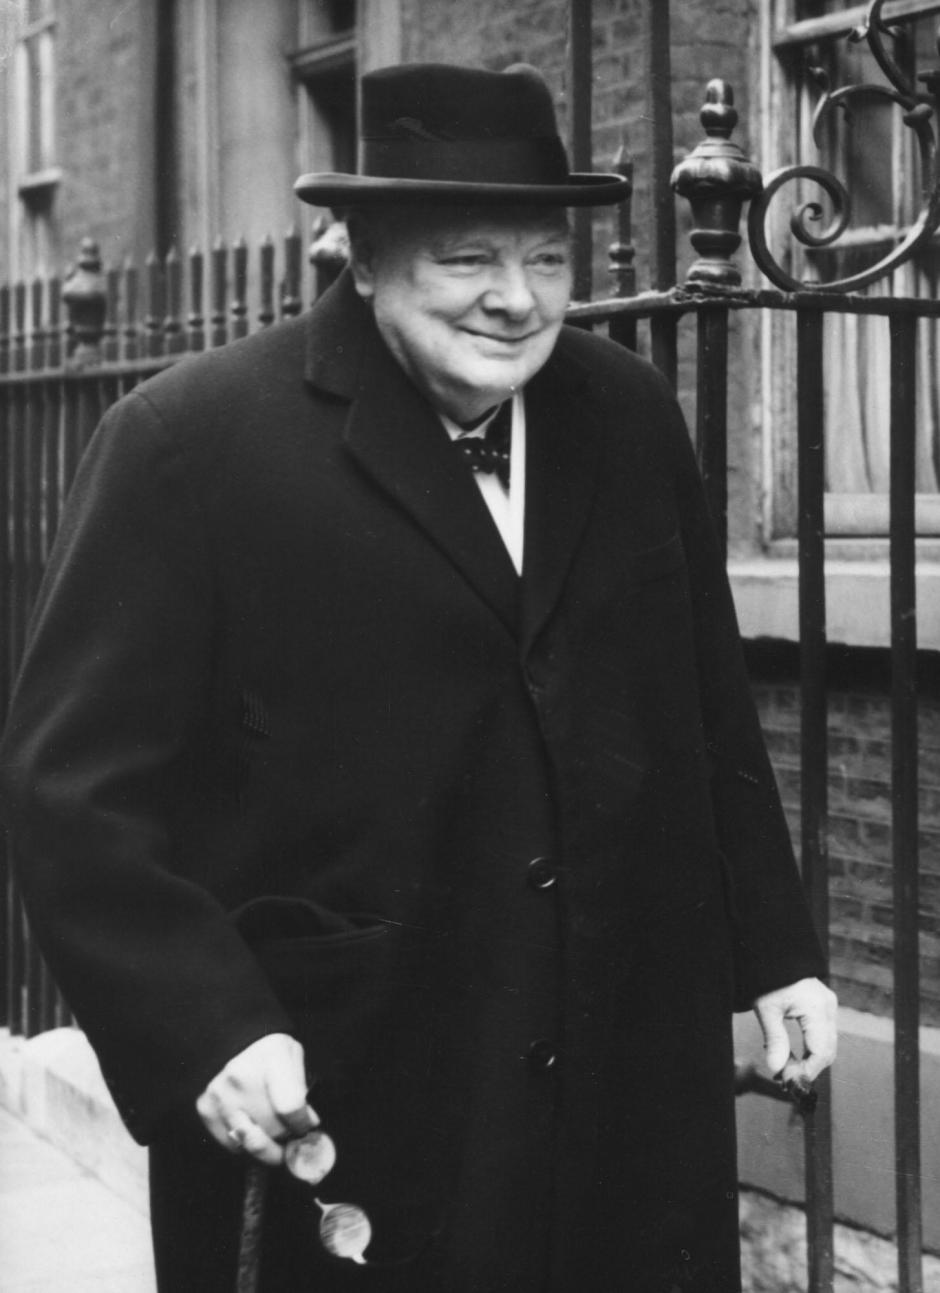 Churchill back the Downing Street - British Premier Sir Winston Churchill arrivest at his official London Residence, 10 Downing Street, today April 27, 1954, from Chequers Country Residence of British Premiers. This afternoon he will be at the house of Commons, where Clement Attlee, leaderss of the Opposition, is expected to ask whether brotain has undertaken any New Commitments in connection with the situation in Indochina. (AP-Photo)